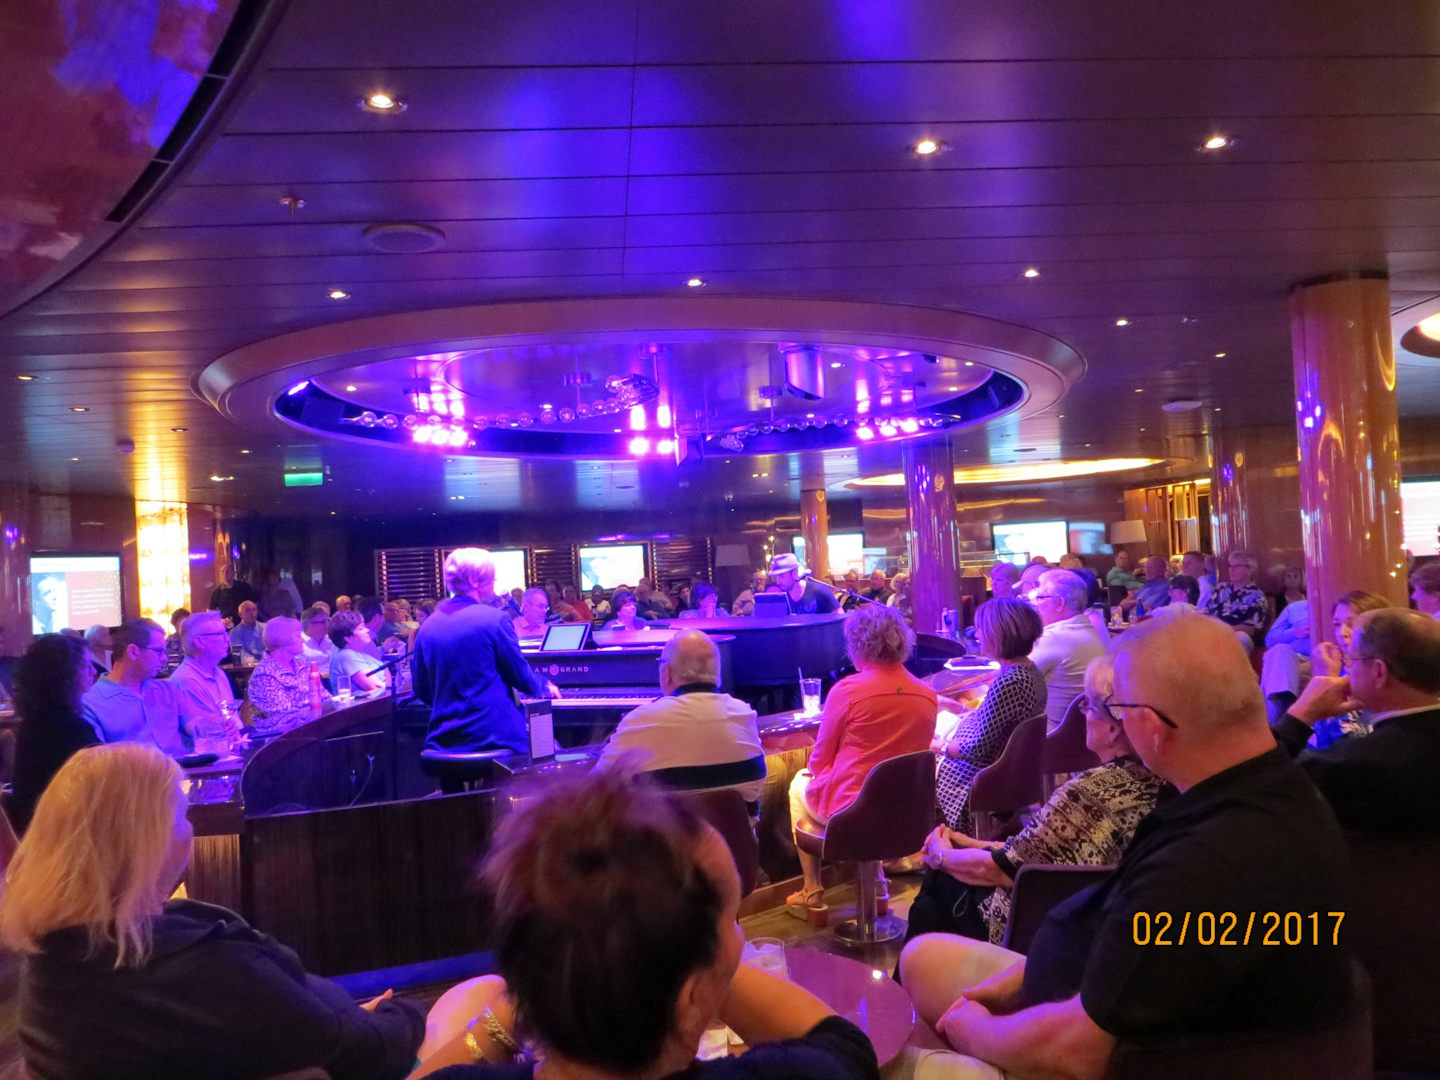 The Billboard Club  dueling pianos